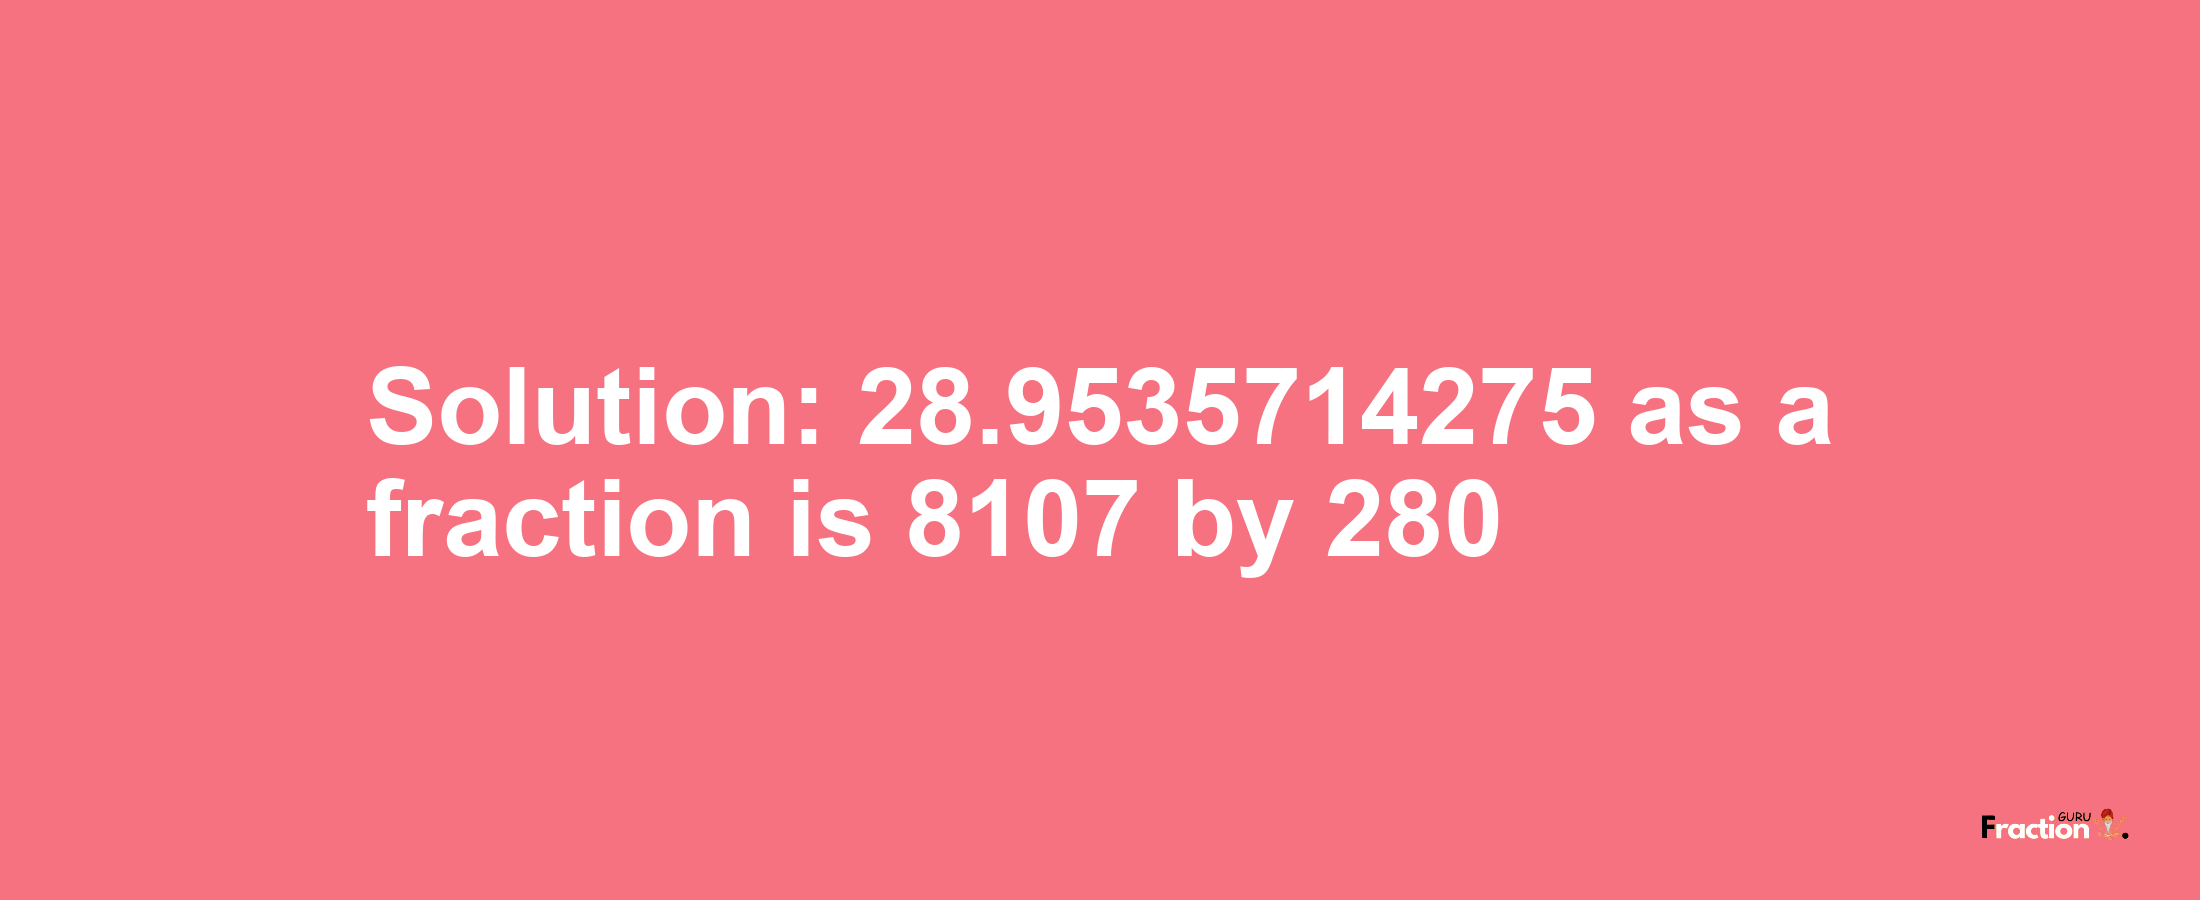 Solution:28.9535714275 as a fraction is 8107/280